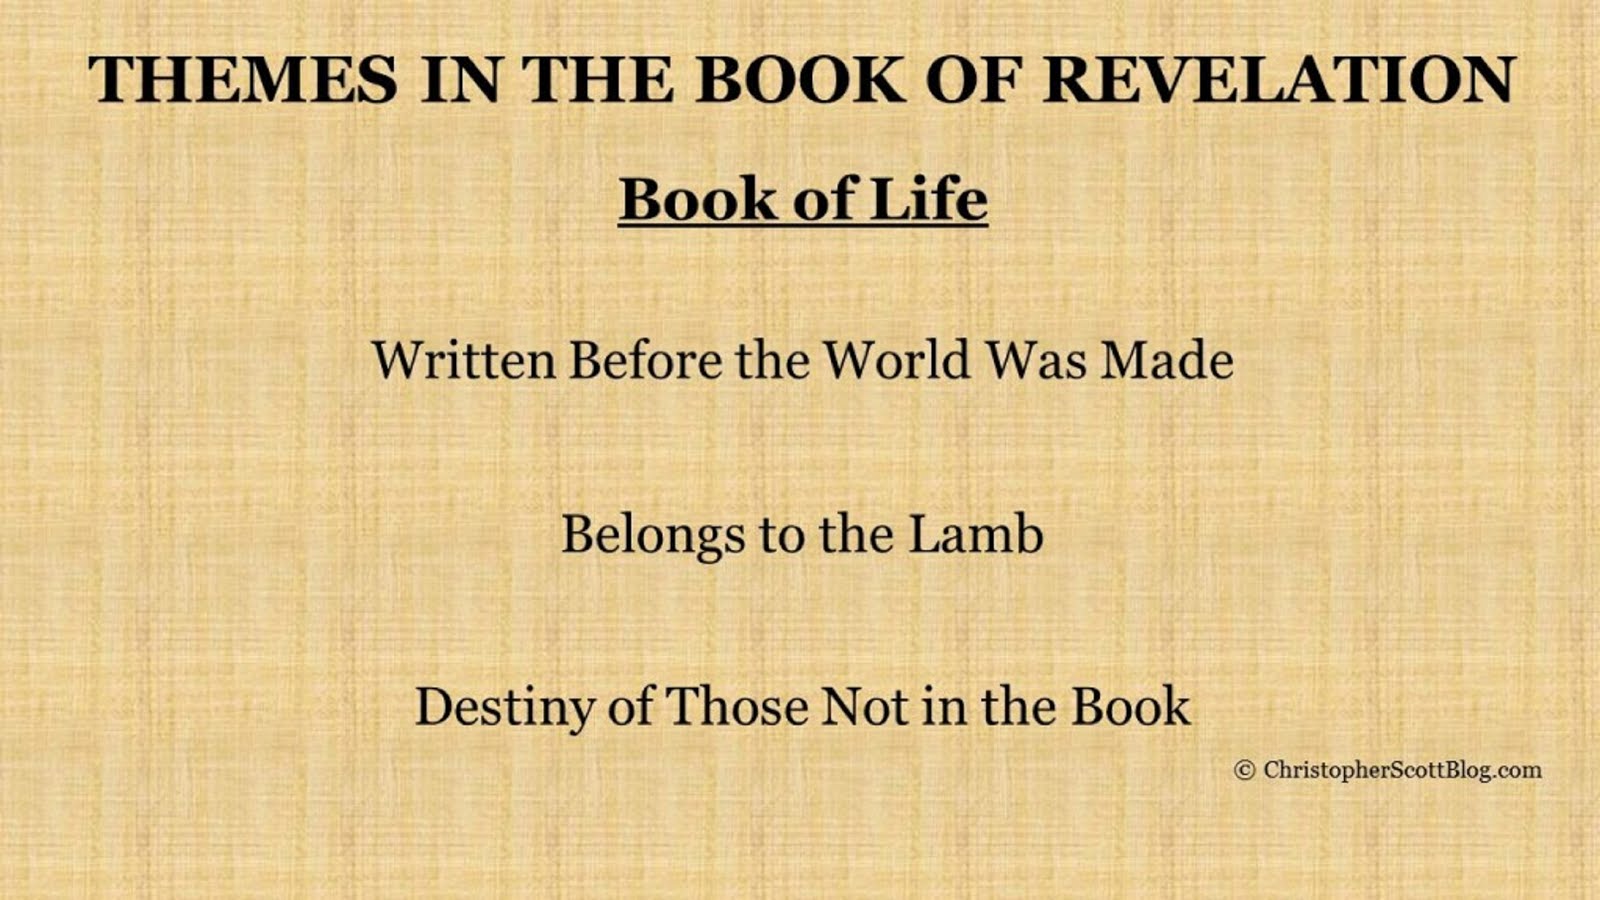 THE BOOK OF LIFE WAS WRITTEN BEFORE THE FOUNDATION OF THE WORLD - AND NOT ADDED AS A WRITTEN IN